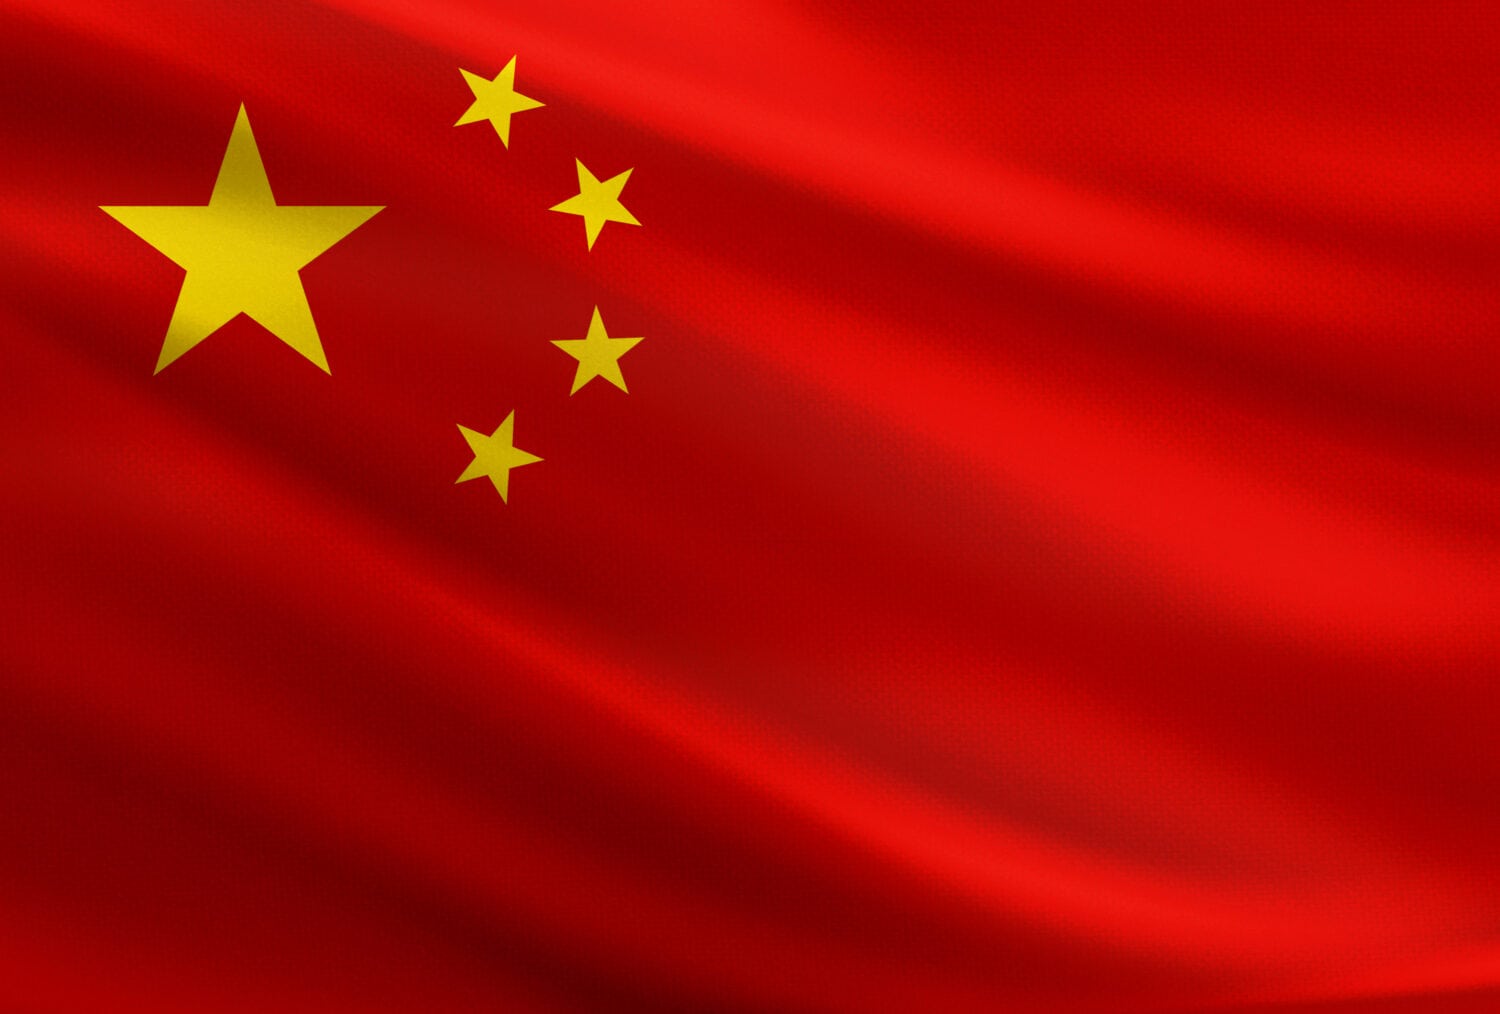 China flag with fabric texture